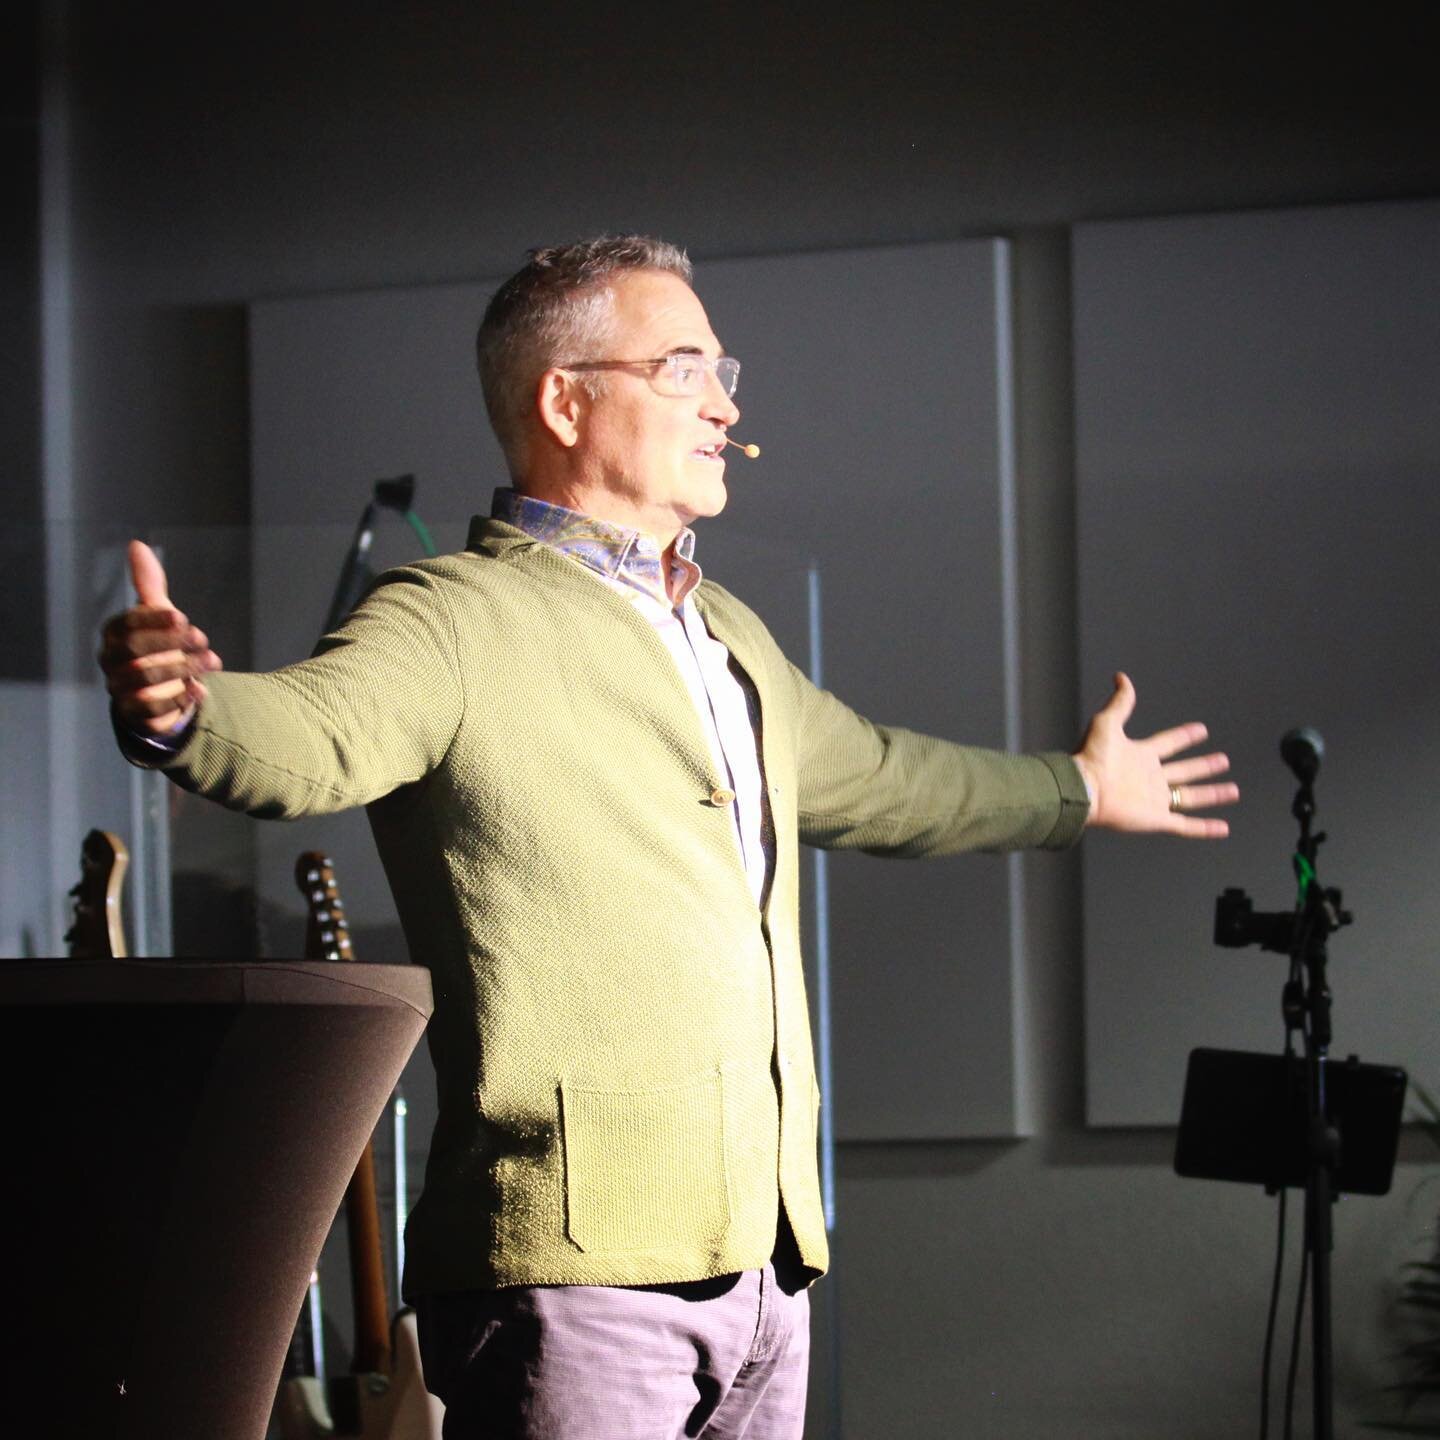 &ldquo;If you can name it, you can tame it.&rdquo;
&ldquo;What we resist, persists.&rdquo;

What an honor and privilege it was to have Steve Scanlon, CEO + Founder of @rewireinc in the house with us last Sunday!  Thank you Steve! 
If you missed his m